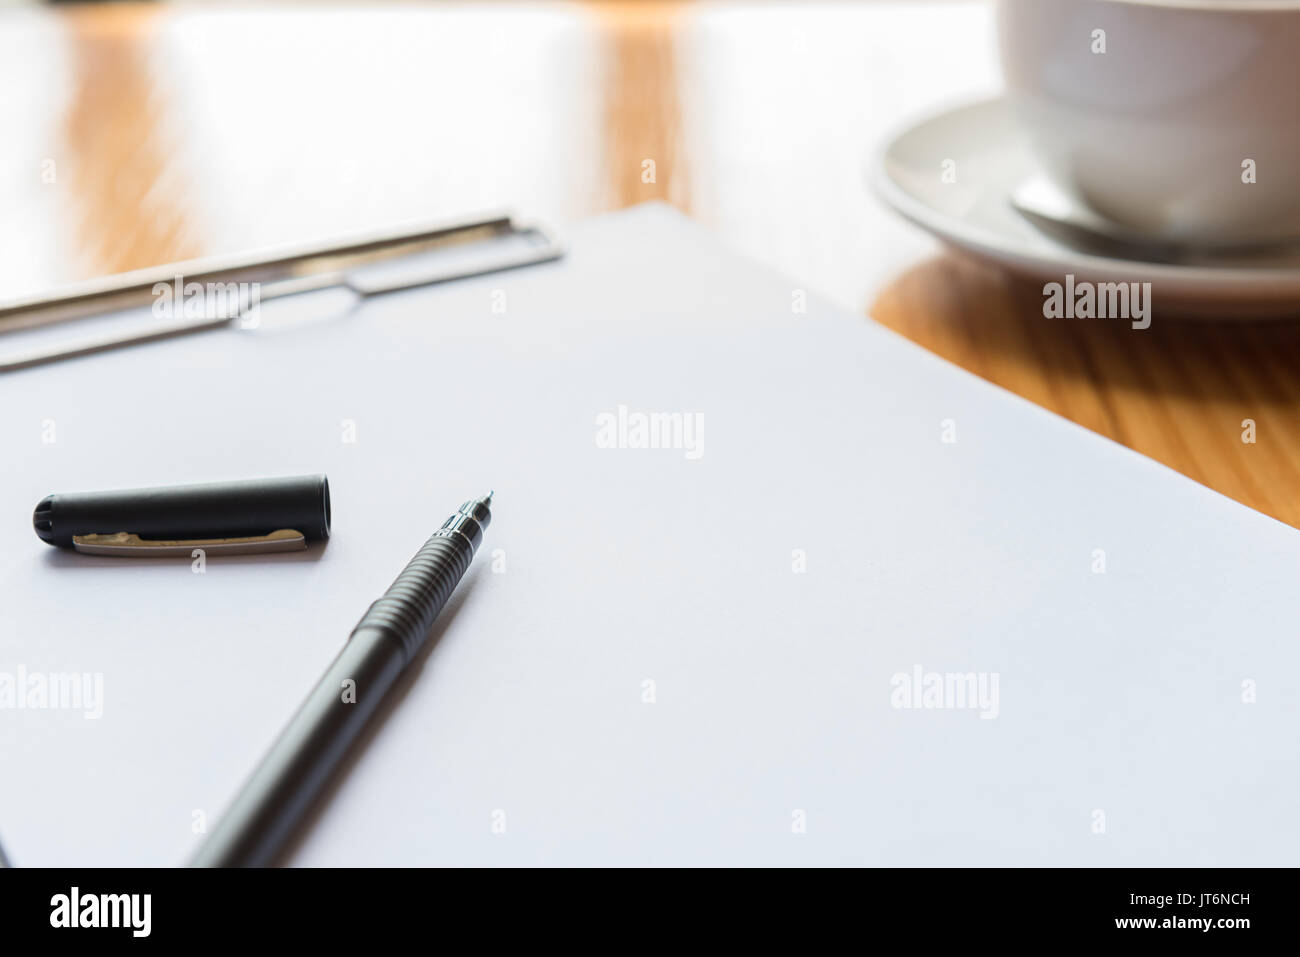 A cup of tea or coffee and a pen and notebook on wooden desks in office Stock Photo